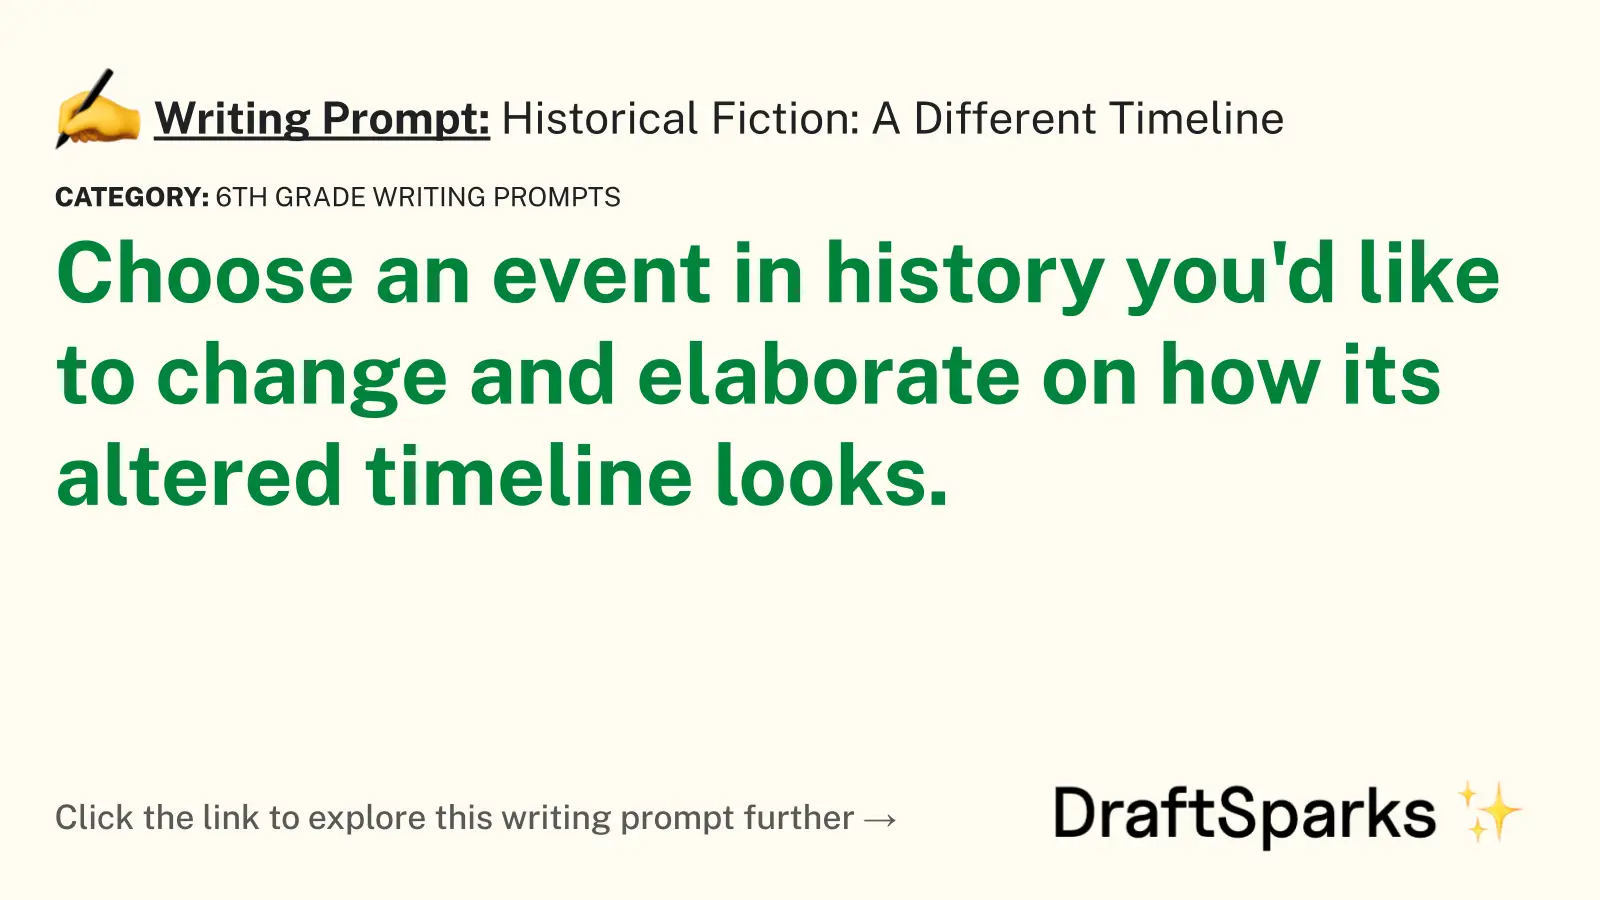 Historical Fiction: A Different Timeline